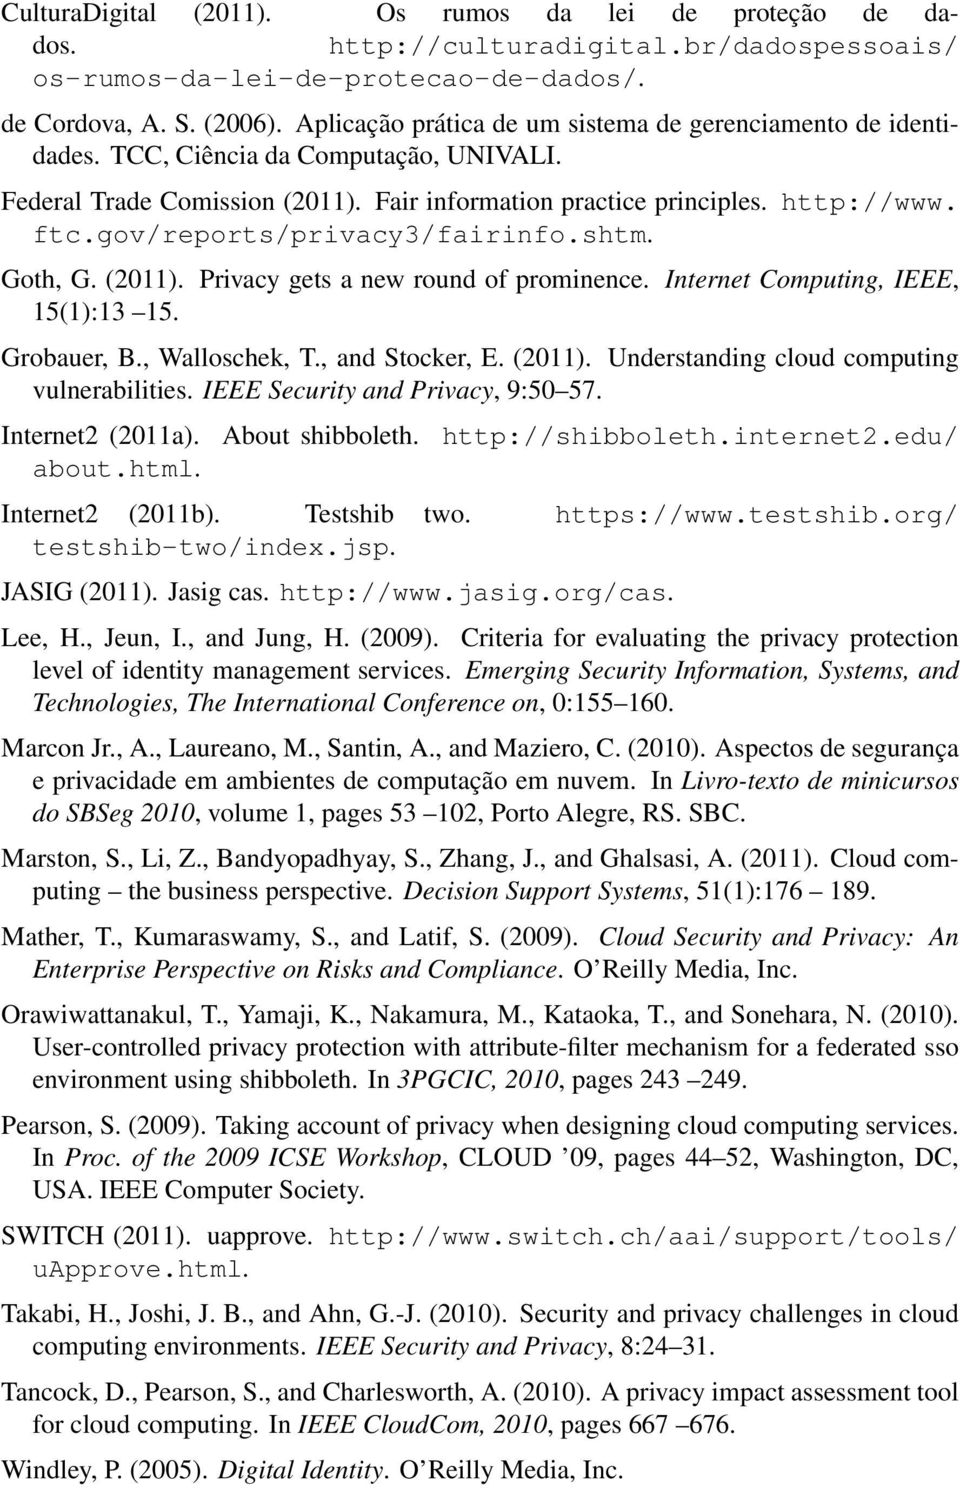 gov/reports/privacy3/fairinfo.shtm. Goth, G. (2011). Privacy gets a new round of prominence. Internet Computing, IEEE, 15(1):13 15. Grobauer, B., Walloschek, T., and Stocker, E. (2011). Understanding cloud computing vulnerabilities.